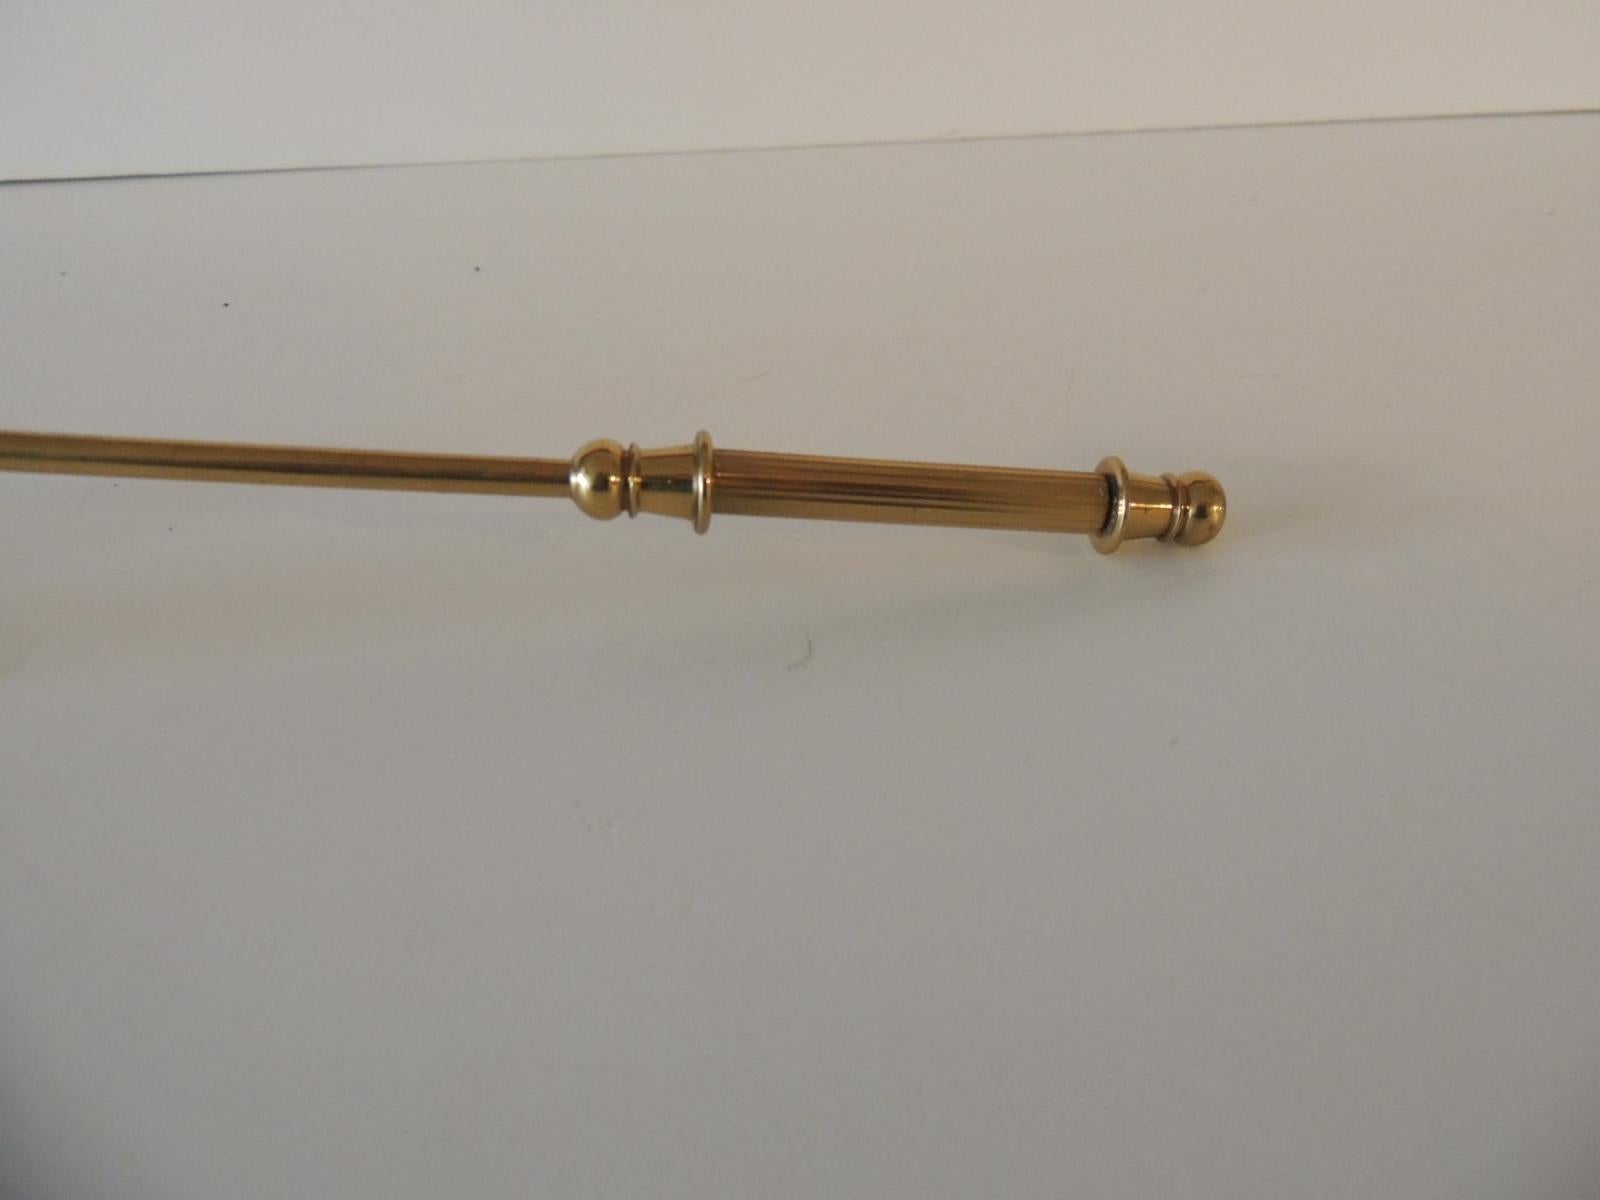 Polished brass articulated candle snuffer with ribbed handle.
Size: 10